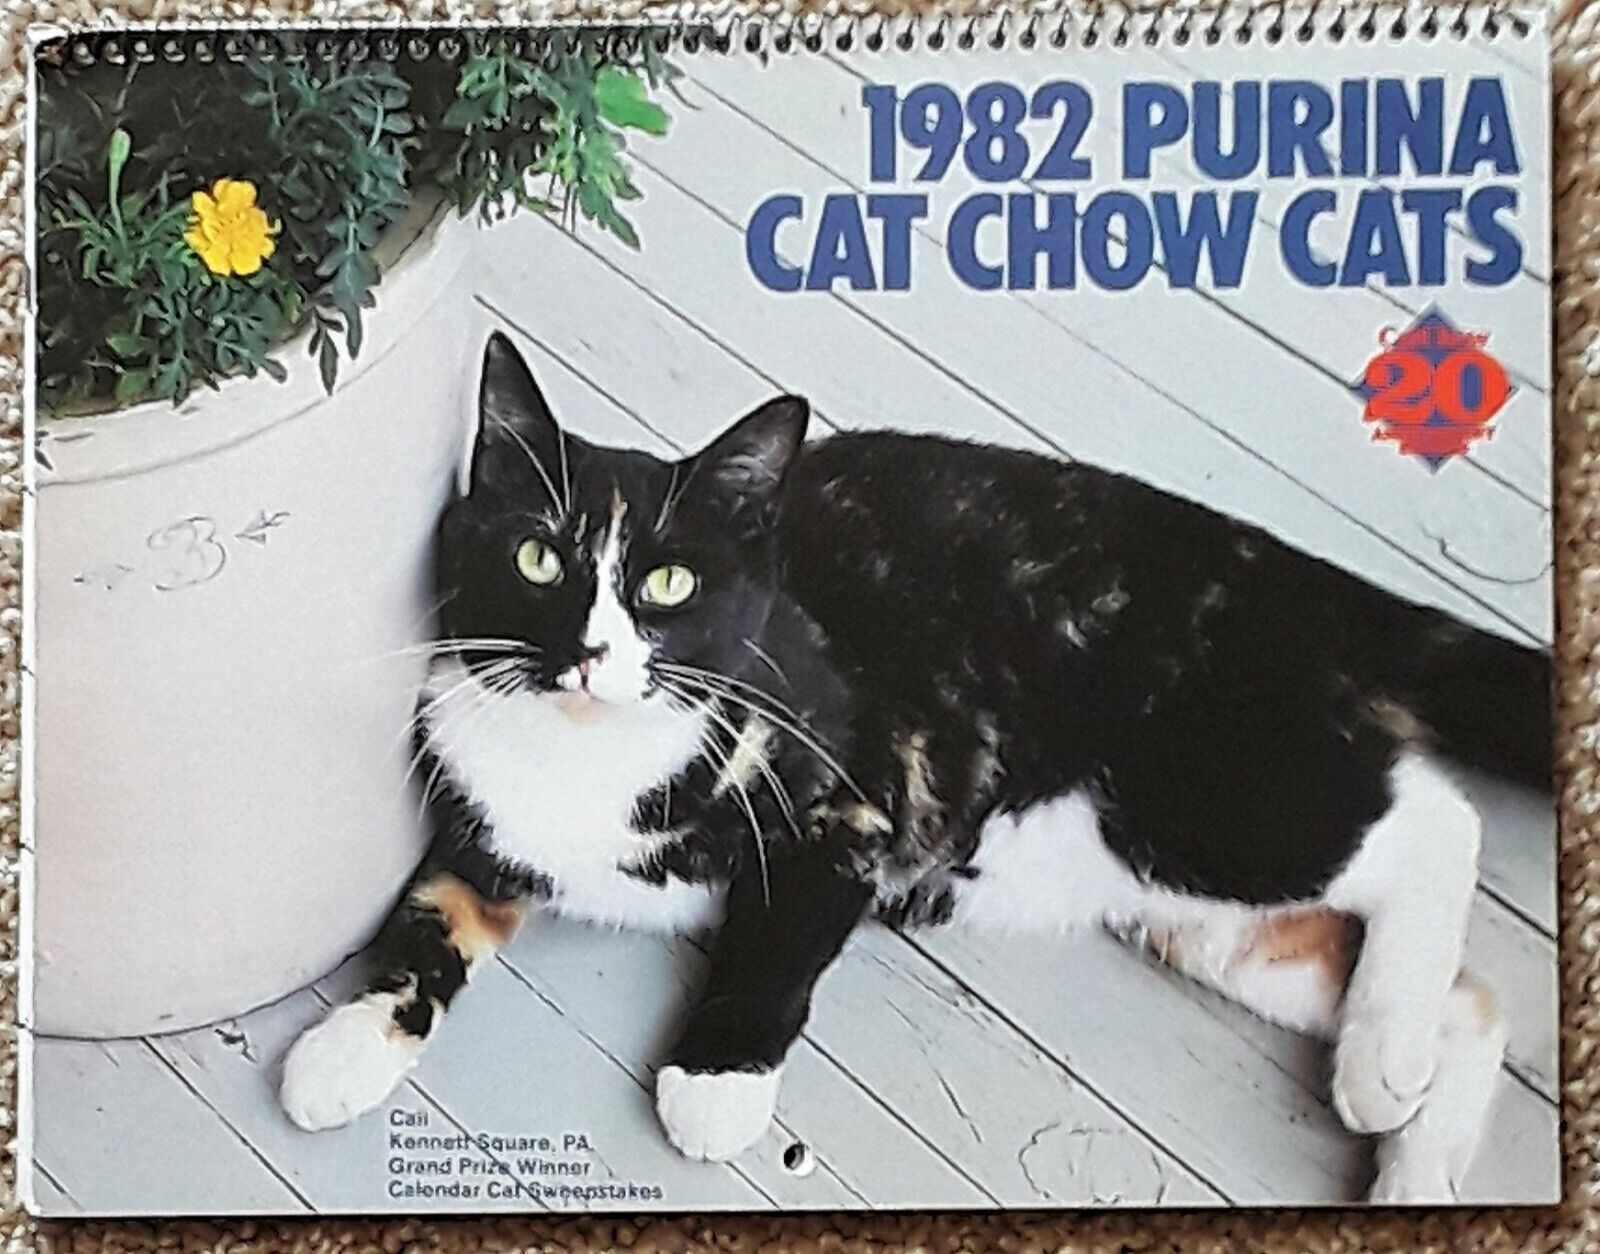 Purina Cat Chow Cats Appointment Calendar 1982 20th Anniversary Edition NEW 